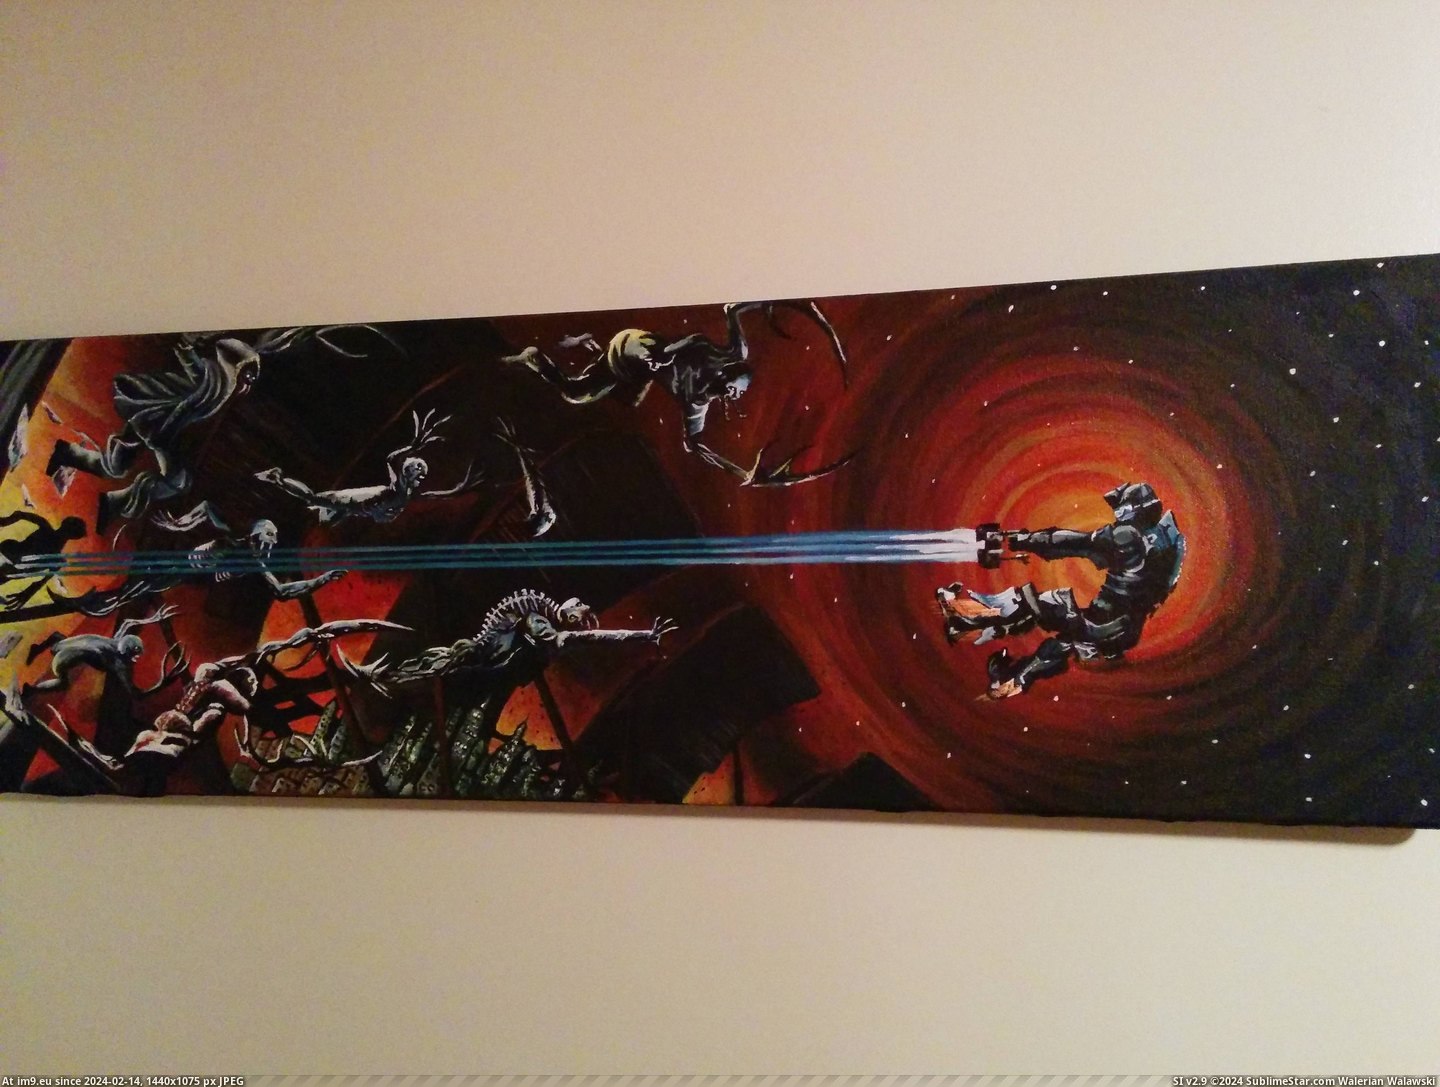 #Gaming #Friend #Space #Dead #Painting #Did [Gaming] A Dead Space painting my friend did for me! 2 Pic. (Image of album My r/GAMING favs))